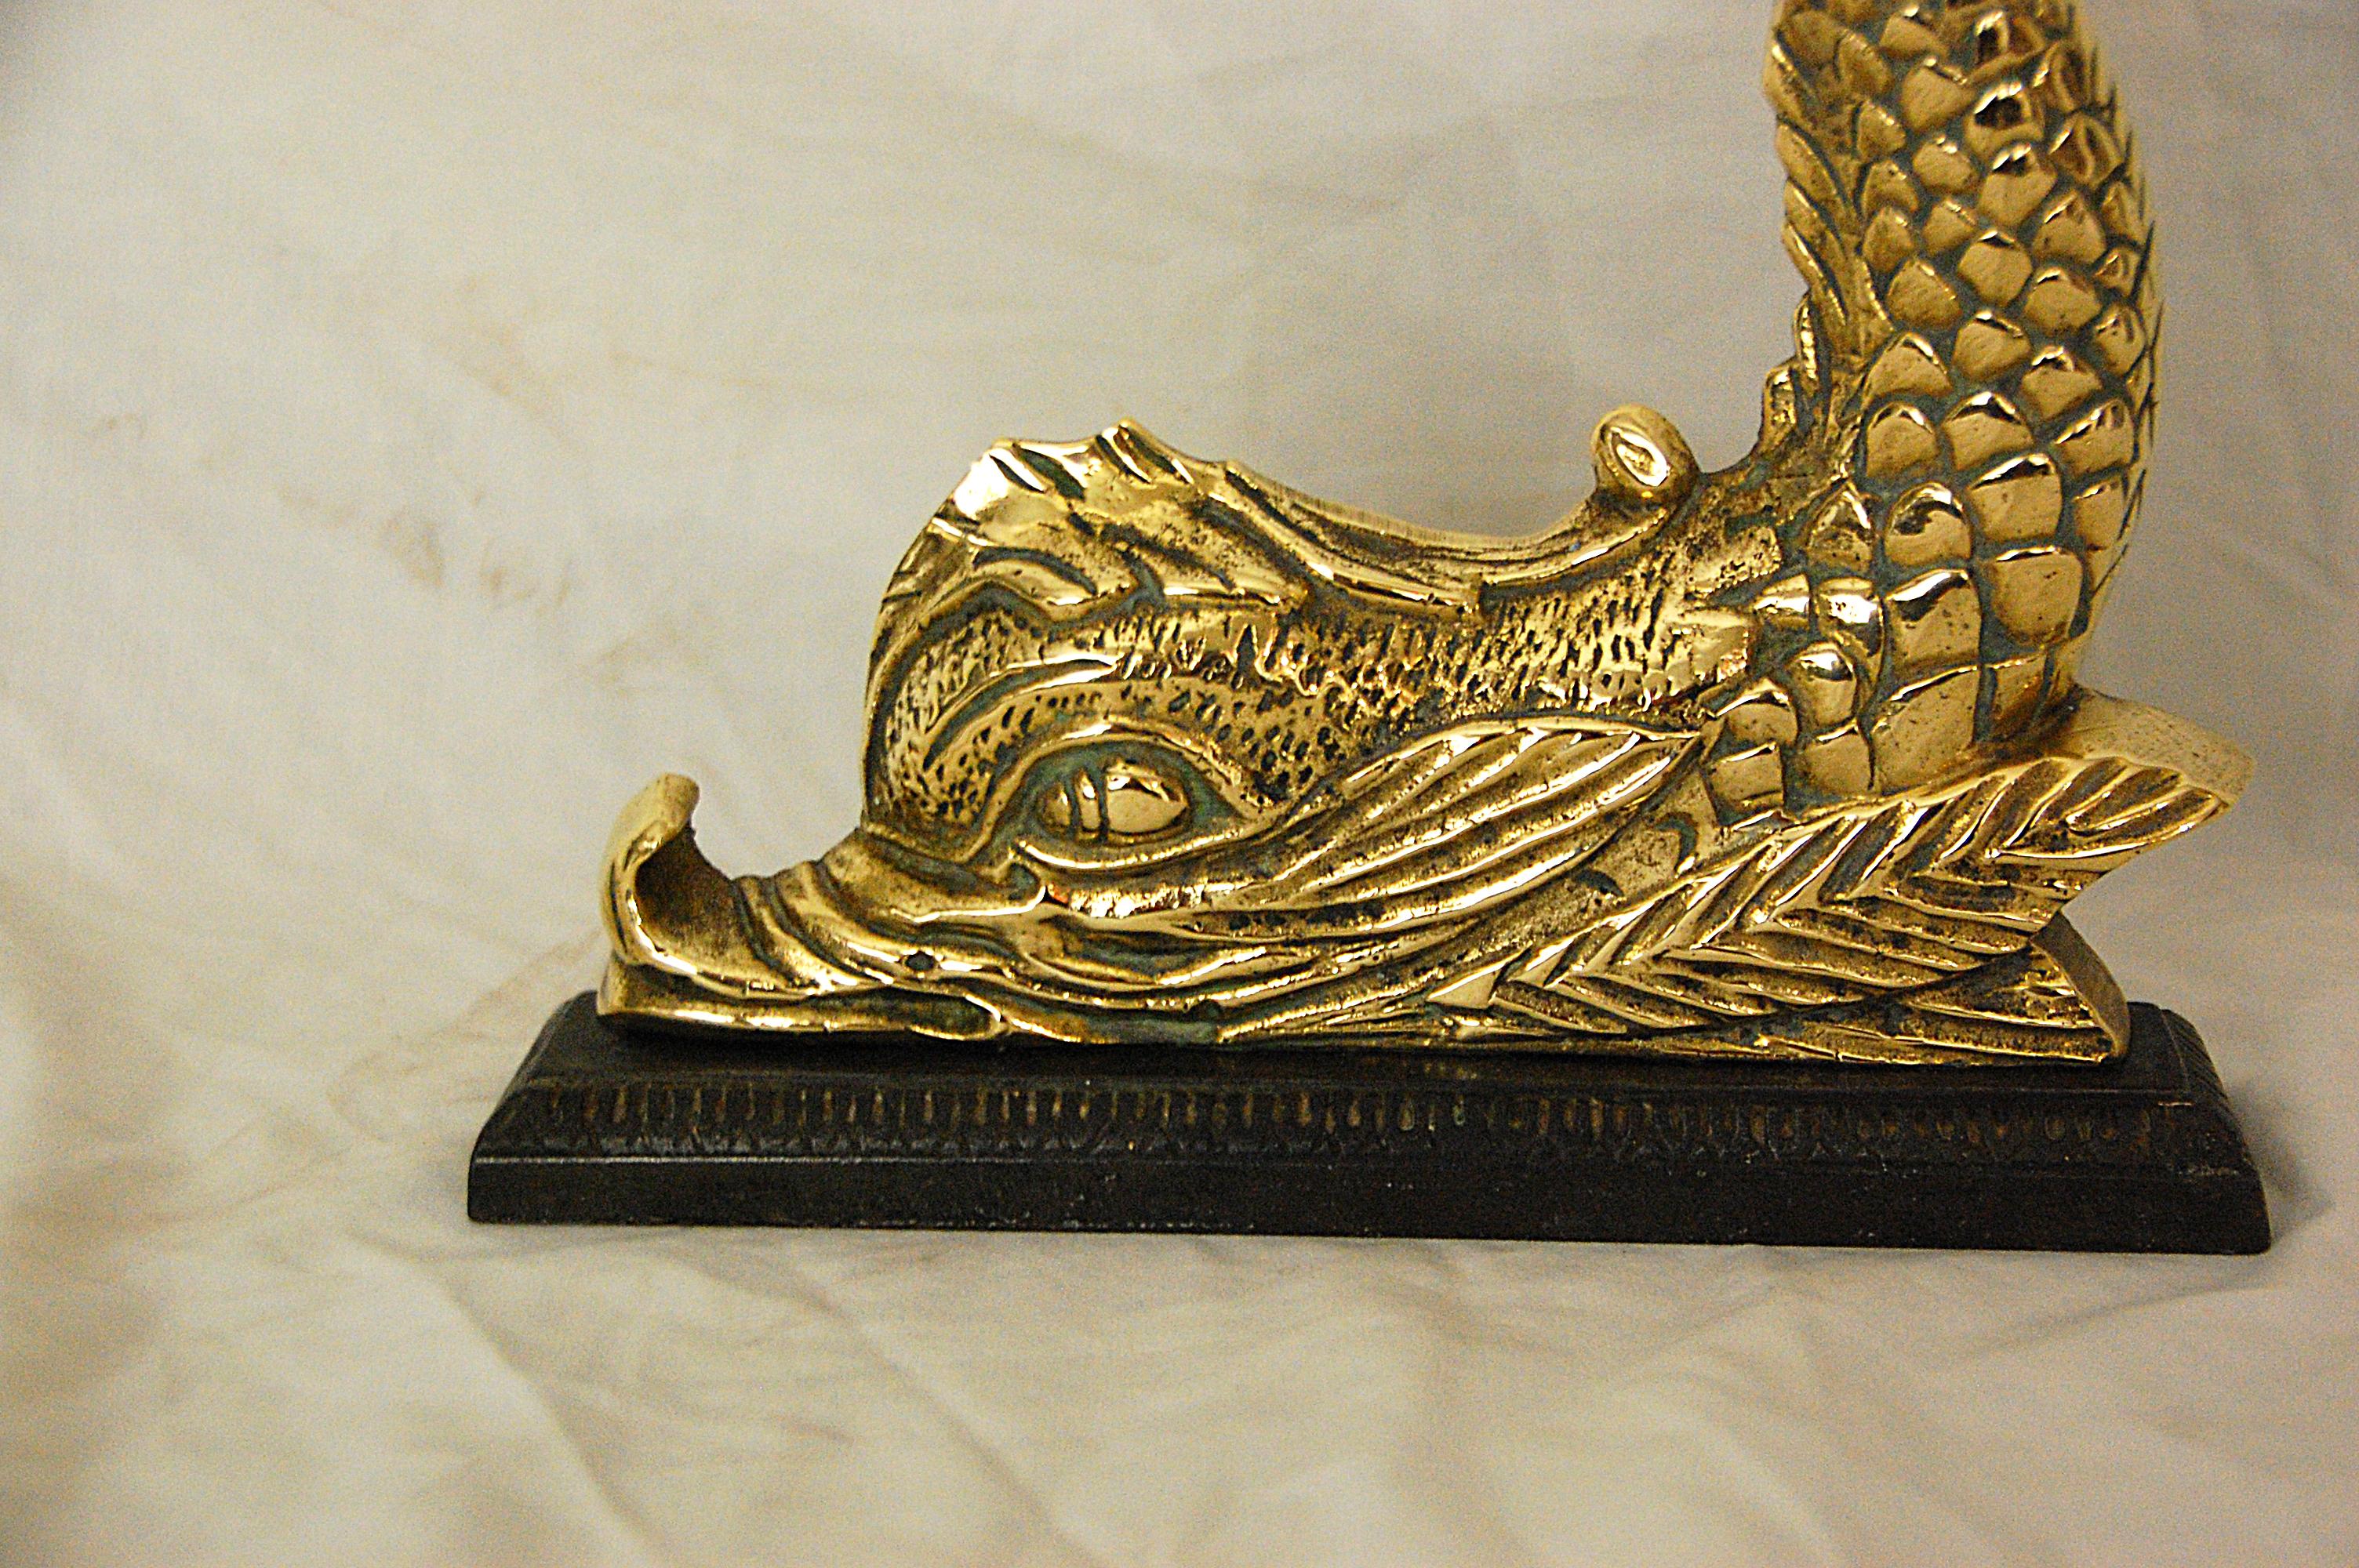 English mid-19th century cast brass dolphin doorstop on original cast iron plinth. This heavy quality well detailed dolphin has his tail curled around in a circle so he is easy to pick up and move and is a wonderful doorstop. If one is searching for